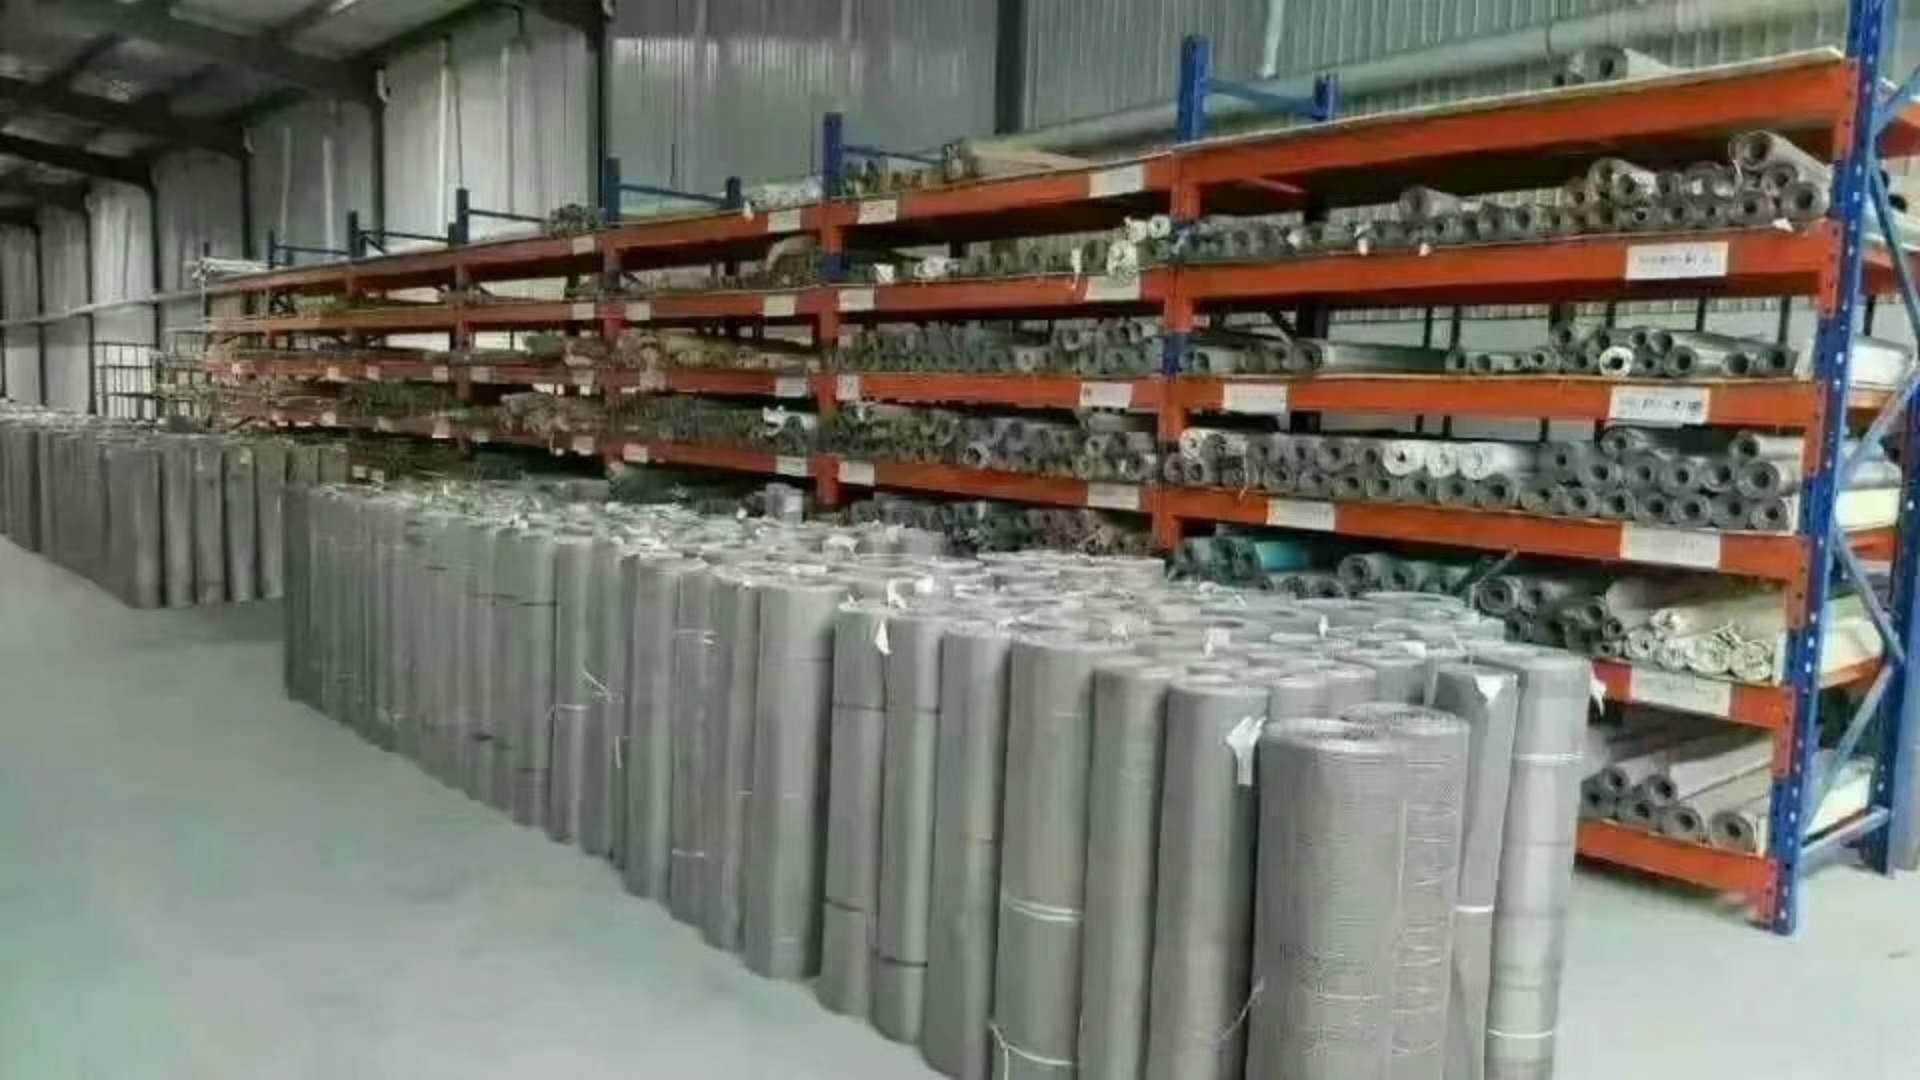 304 stainless steel wire corrugated packing CY-700 type chemical structured packing